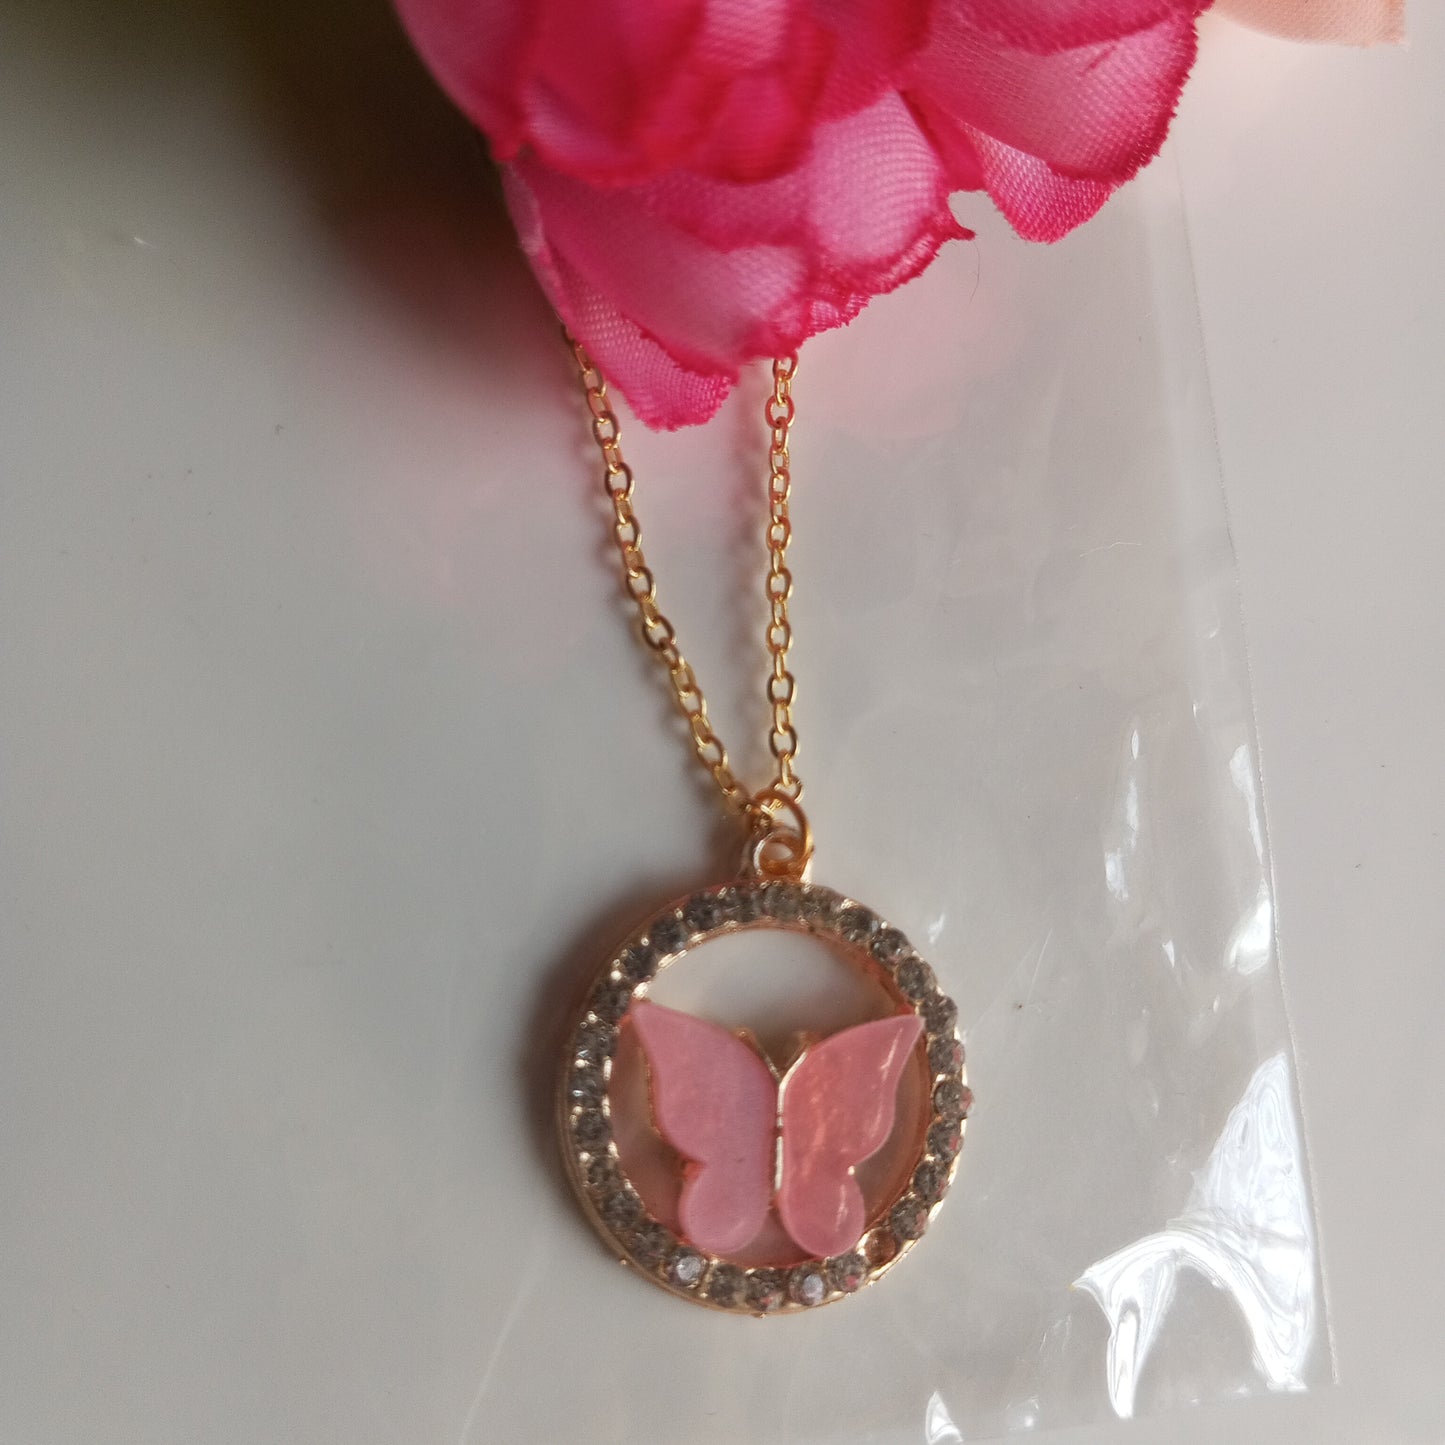 Chain with Pendant- cz Round Pink Butterfly